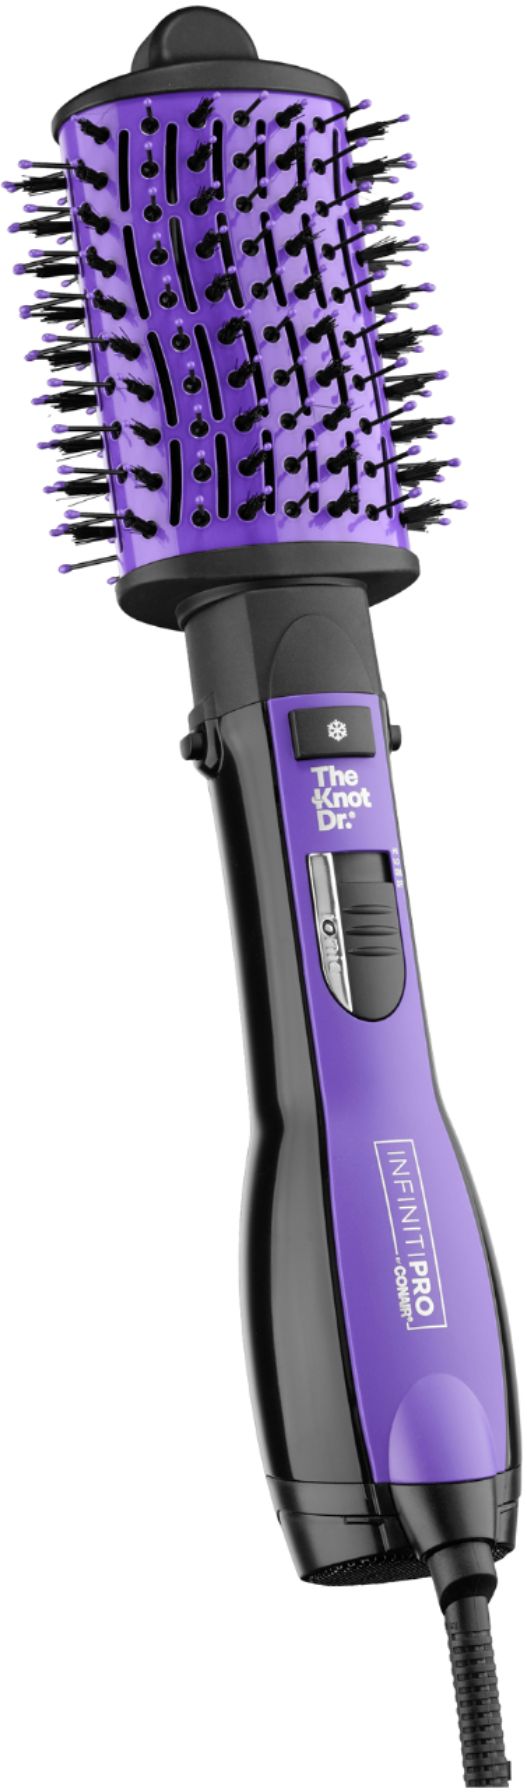 Conair - All-in-One Dryer Brush - Purple And Black_12